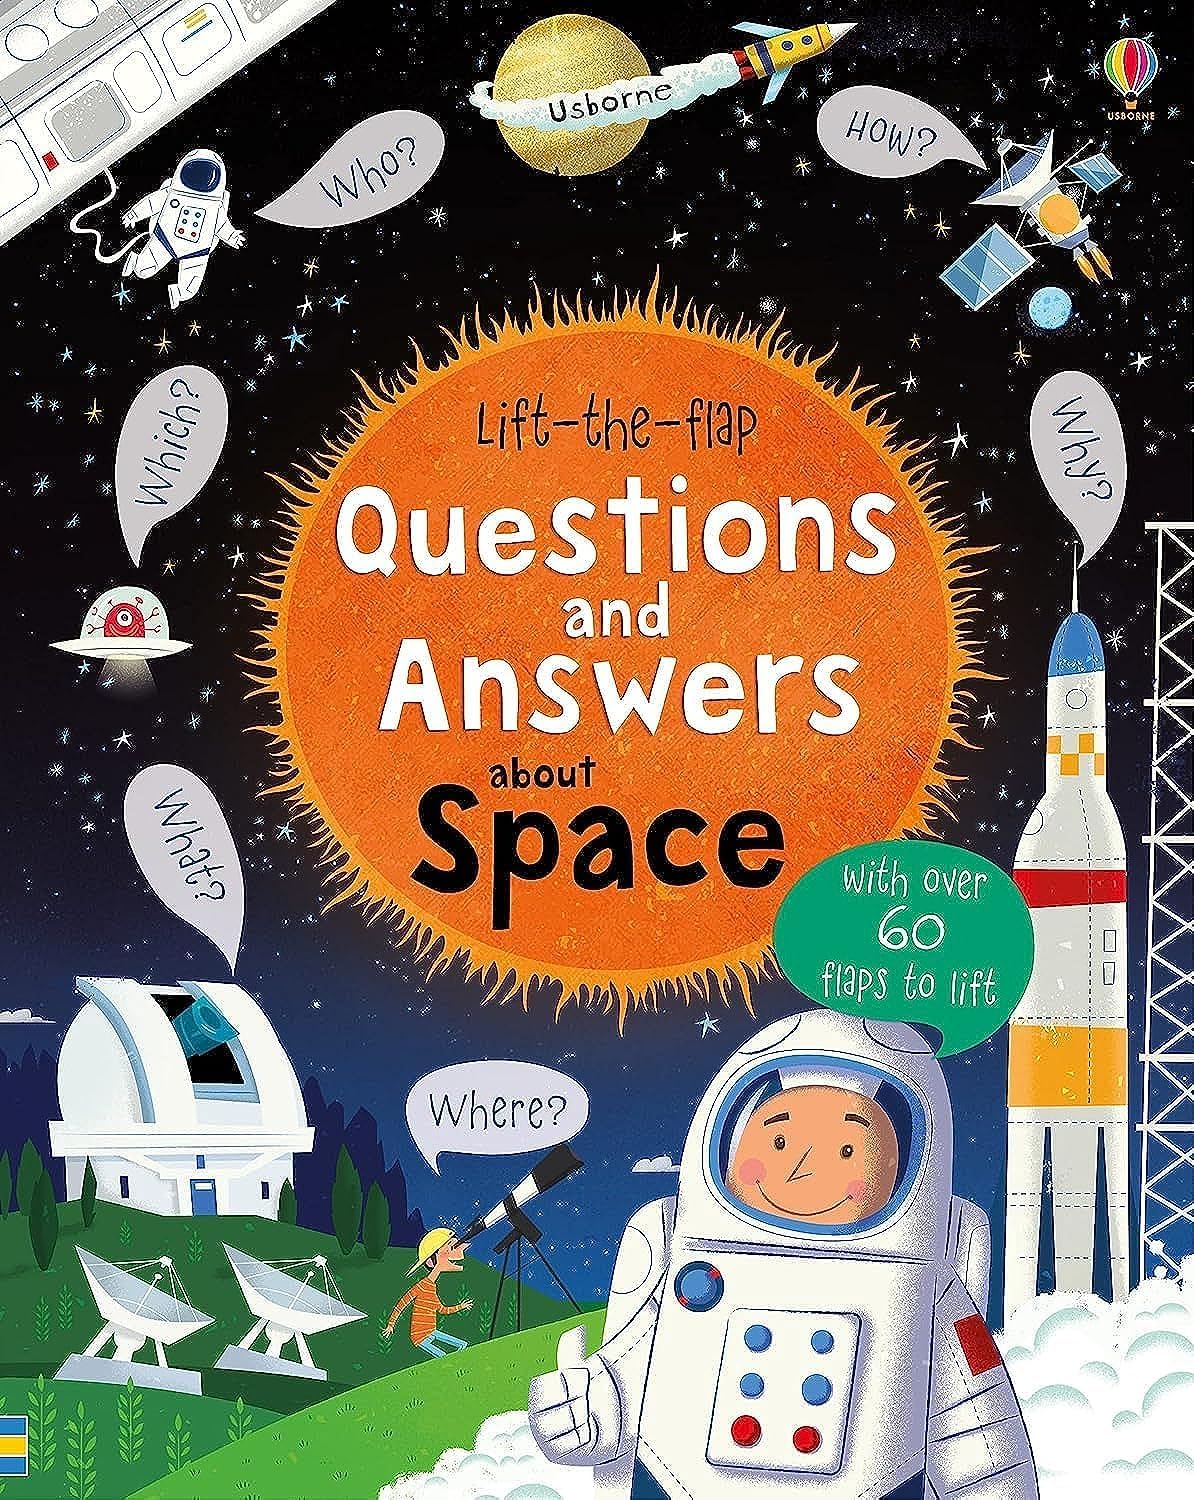 book cover with illustrated astronaut and various other space things